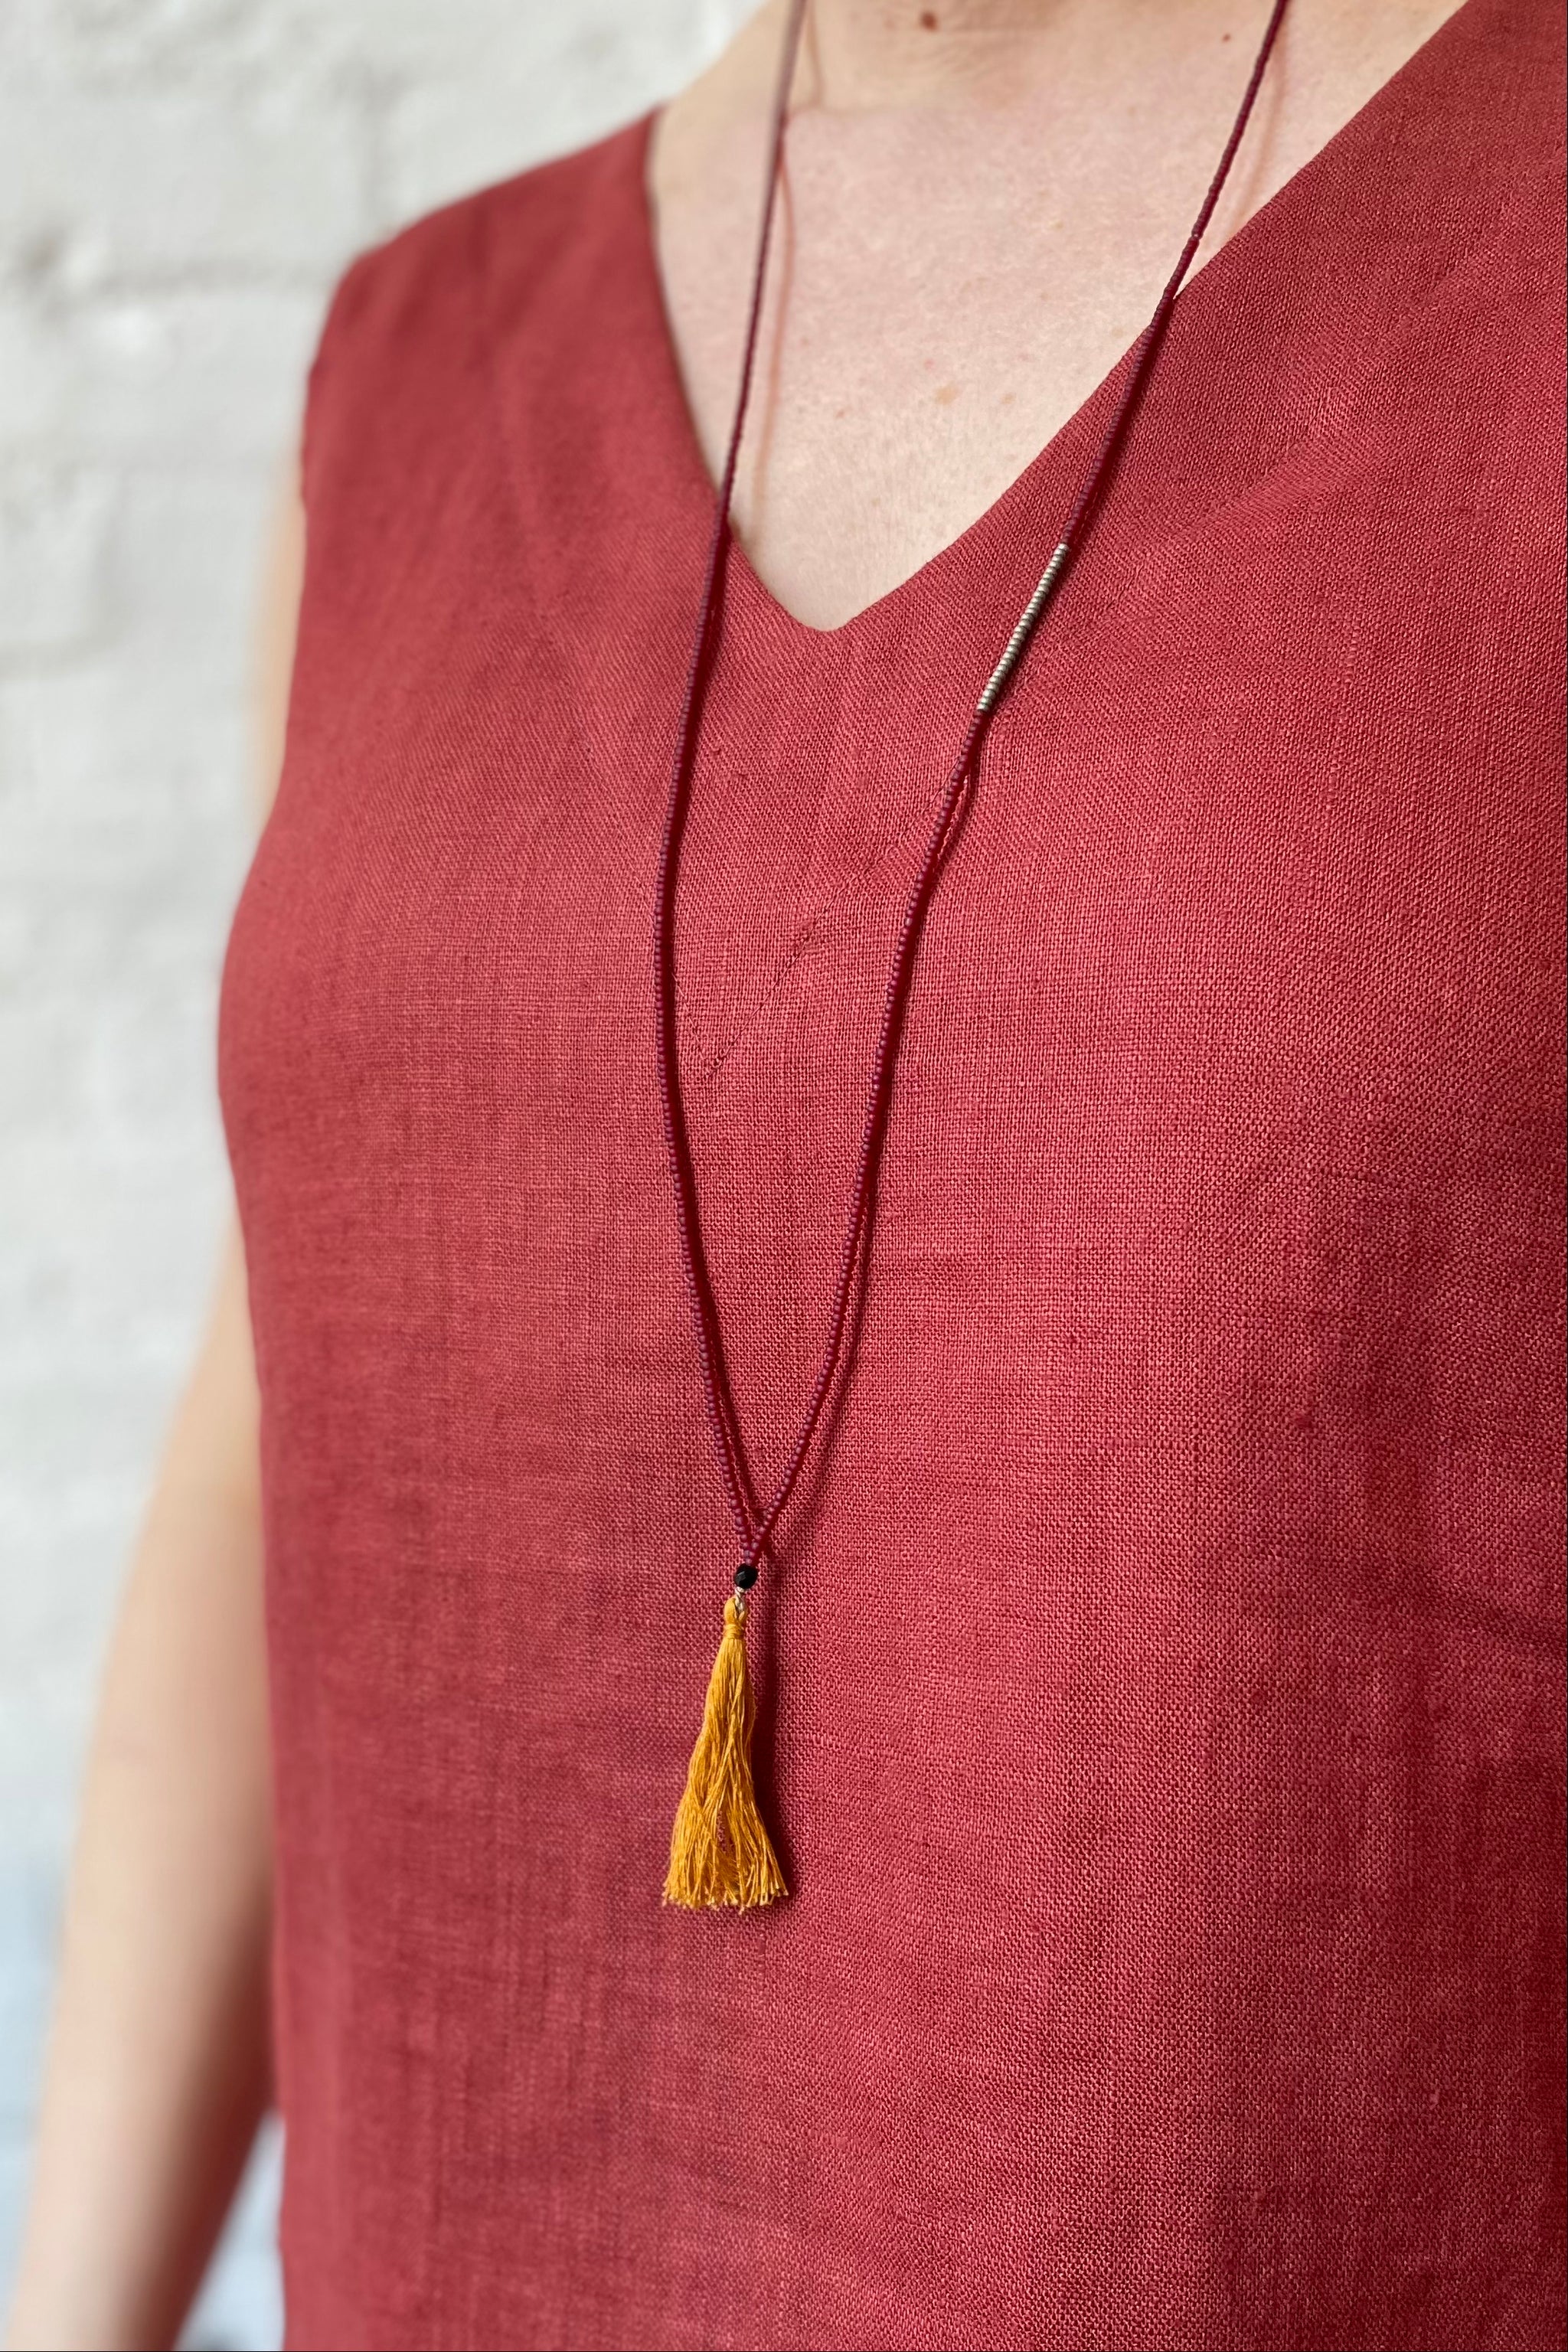 Long beaded necklae with a fringe tassel worn over a linen top.